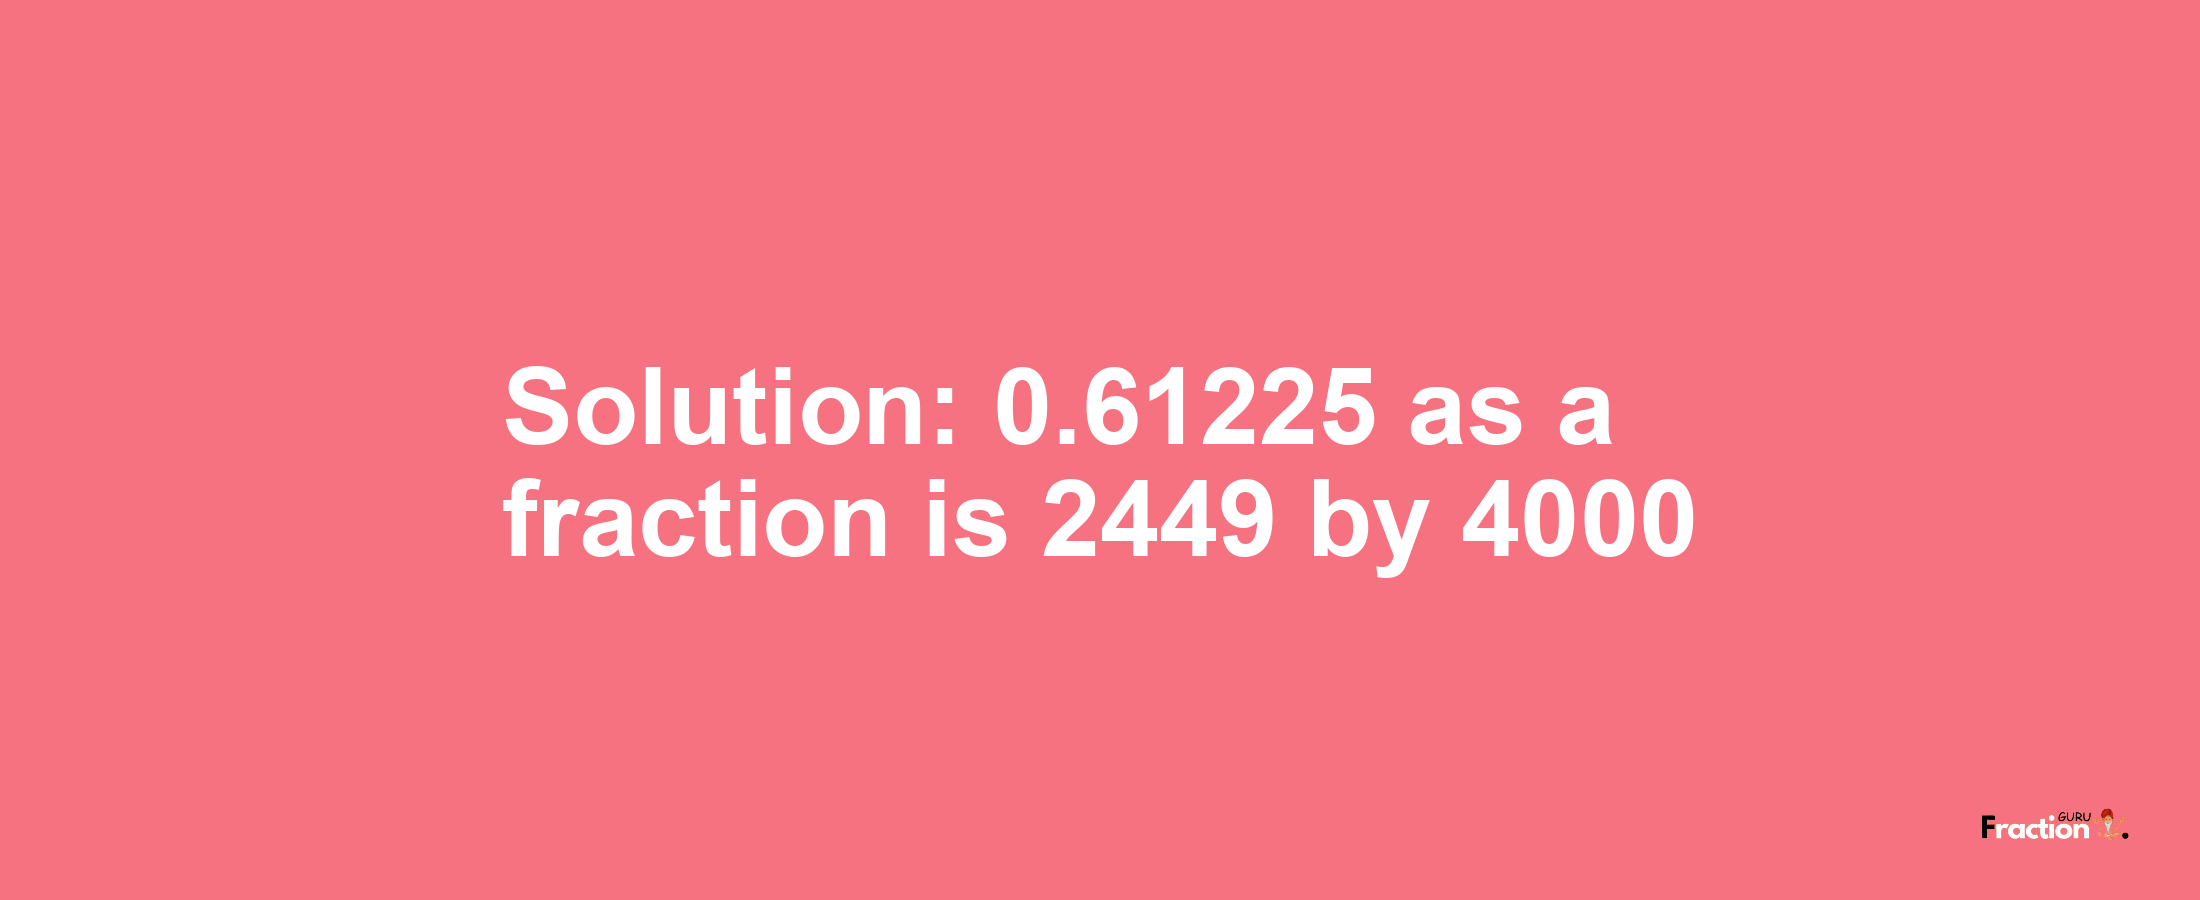 Solution:0.61225 as a fraction is 2449/4000